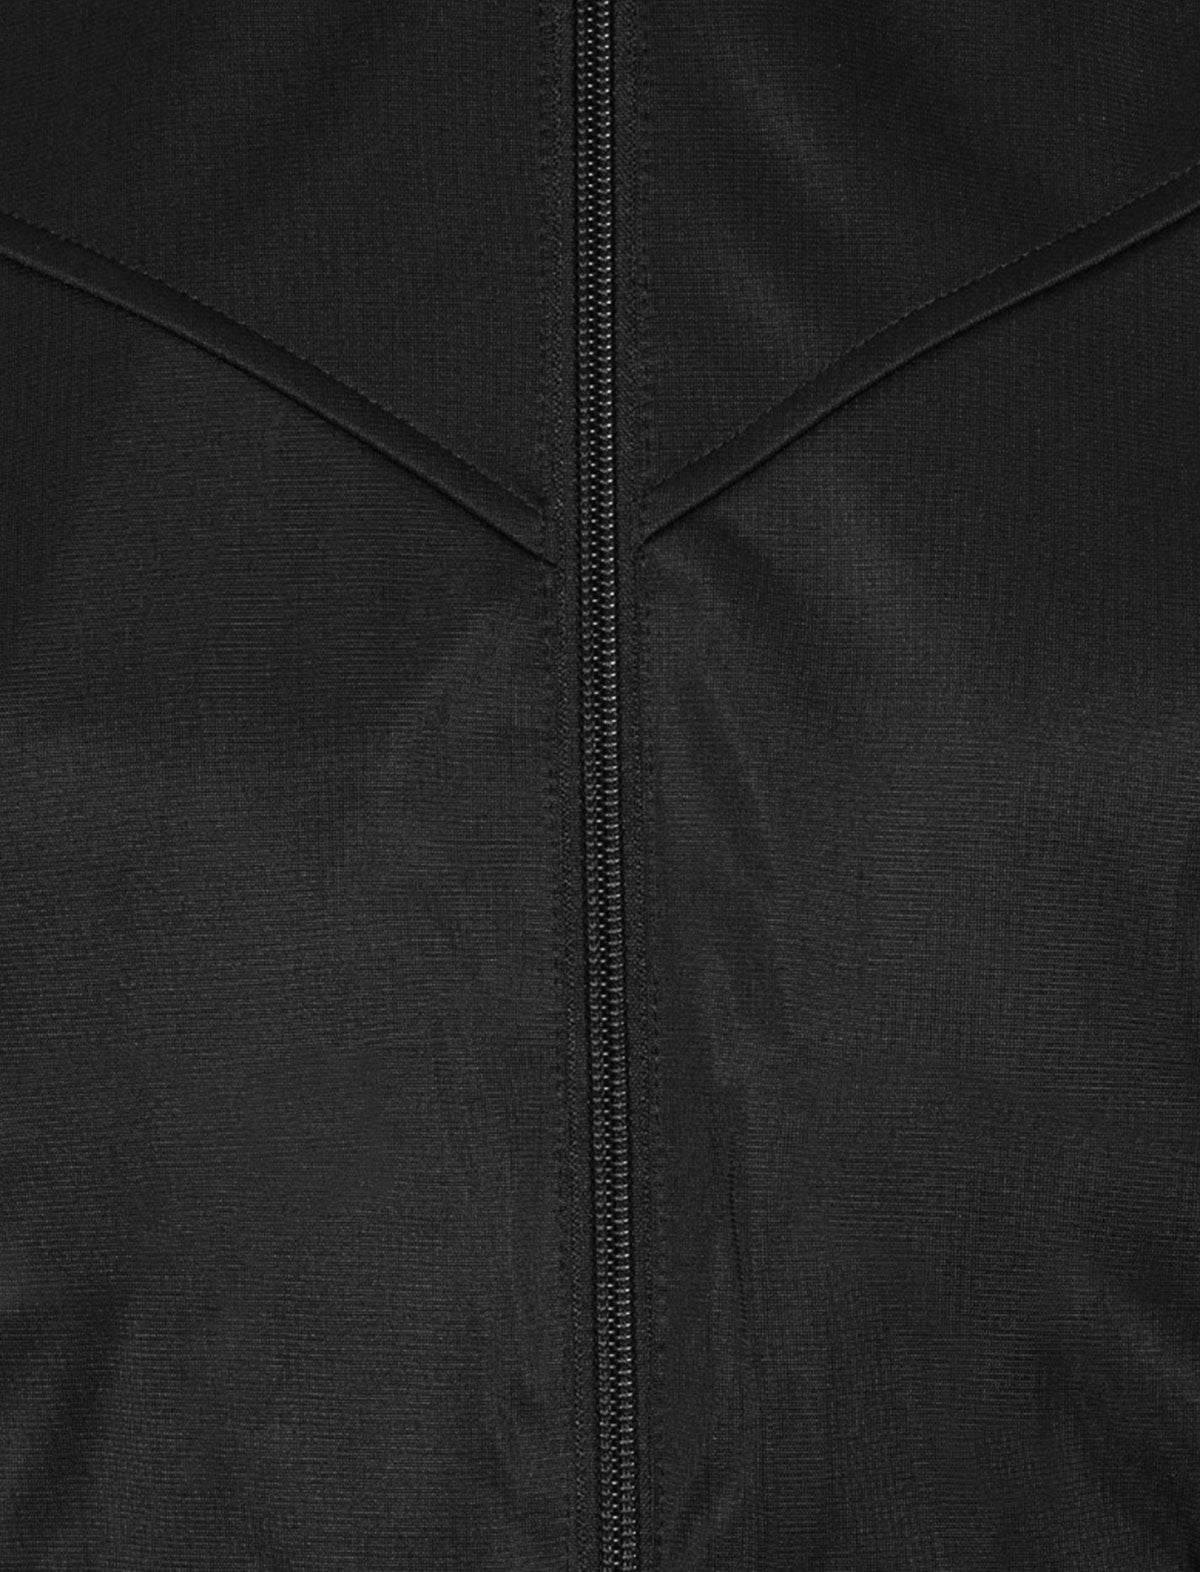 ROTATE SUNDAY 6 Cropped Stretch Jacket in Black